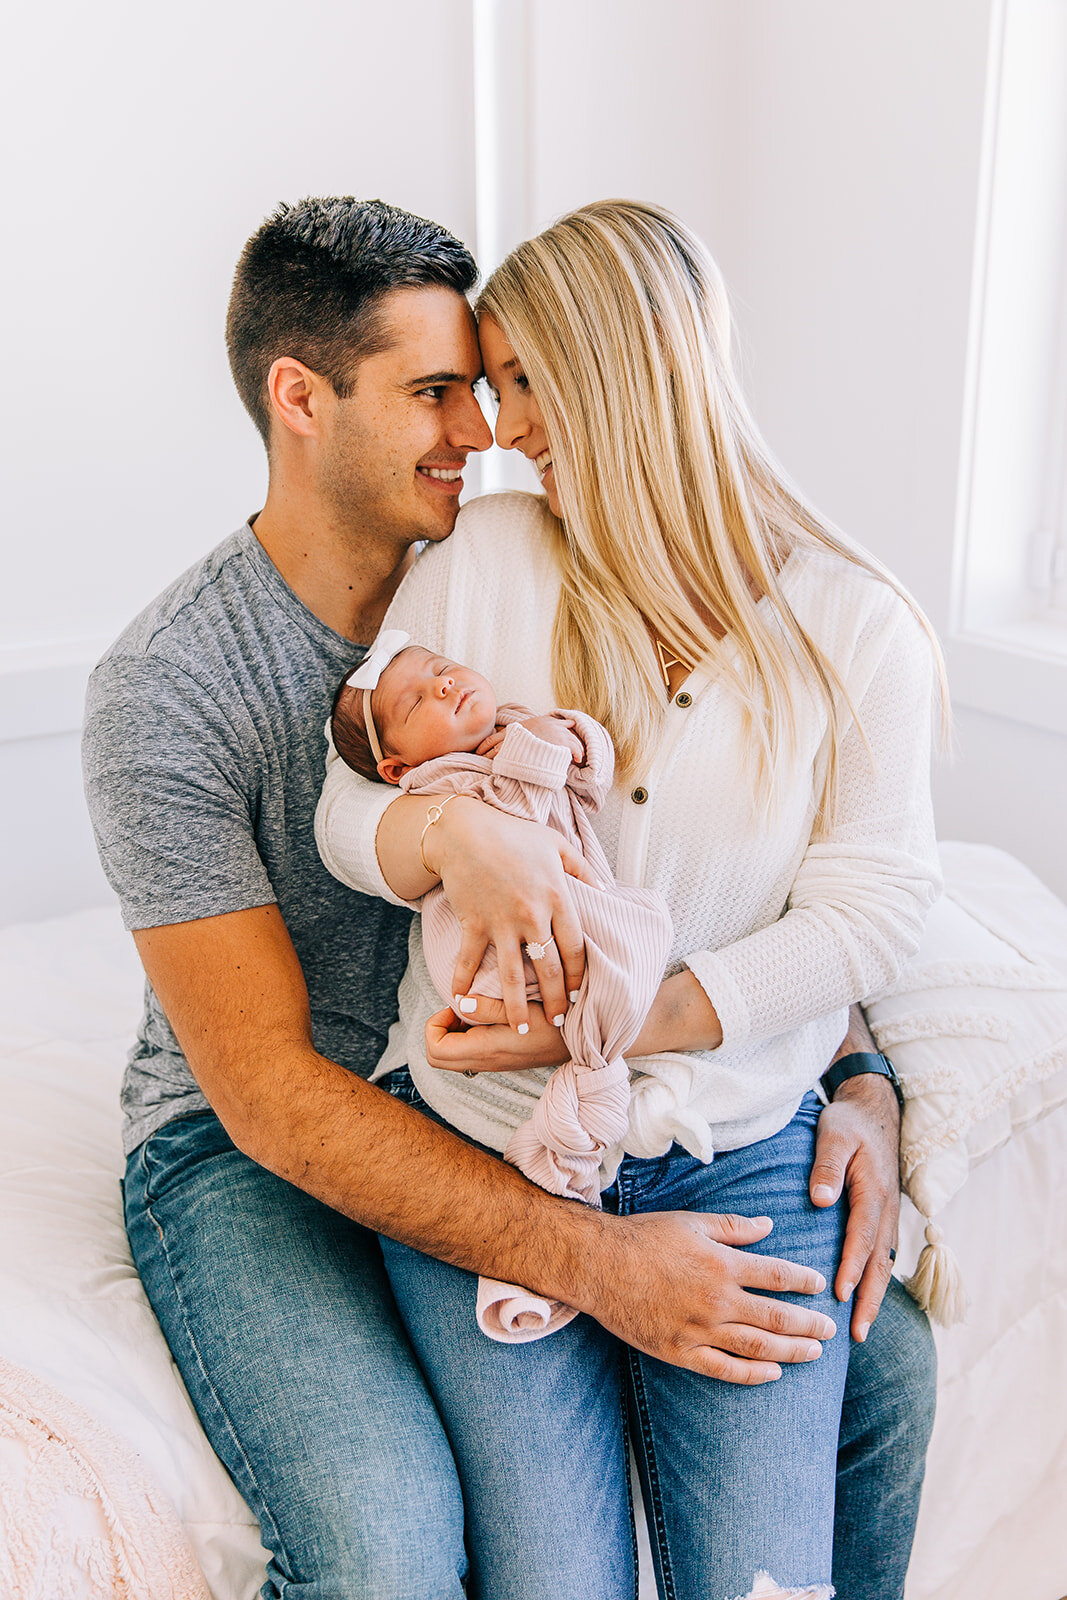  adorable picture of new family small family young parents first time parents mom and dad looking into each others eyes holding new baby girl newborn photography logan utah blush door studio pink baby dress natural light studio indoor photos newborn 